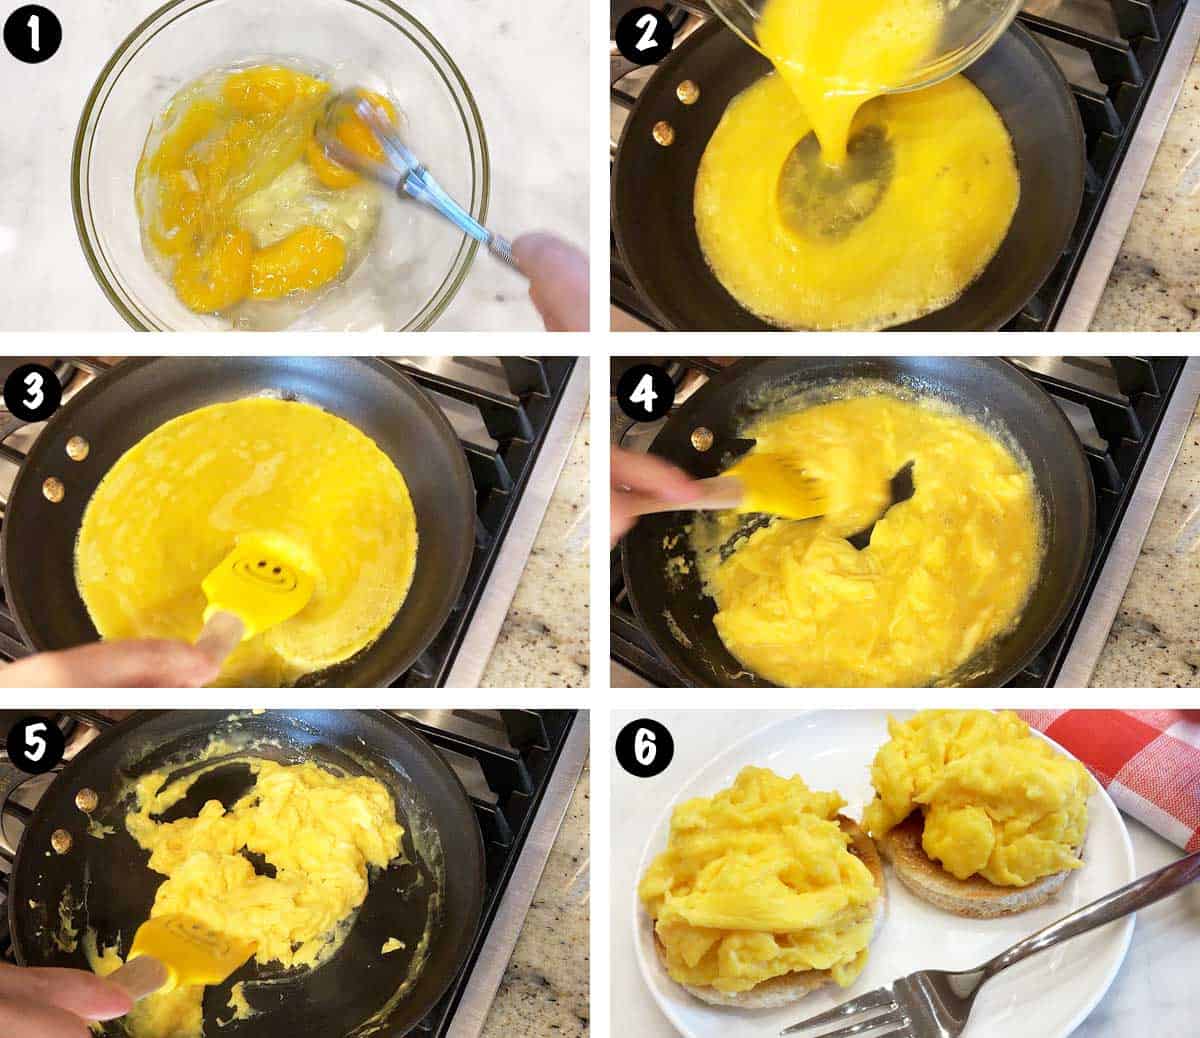 A six-photo collage showing the steps for cooking soft-scrambled eggs.